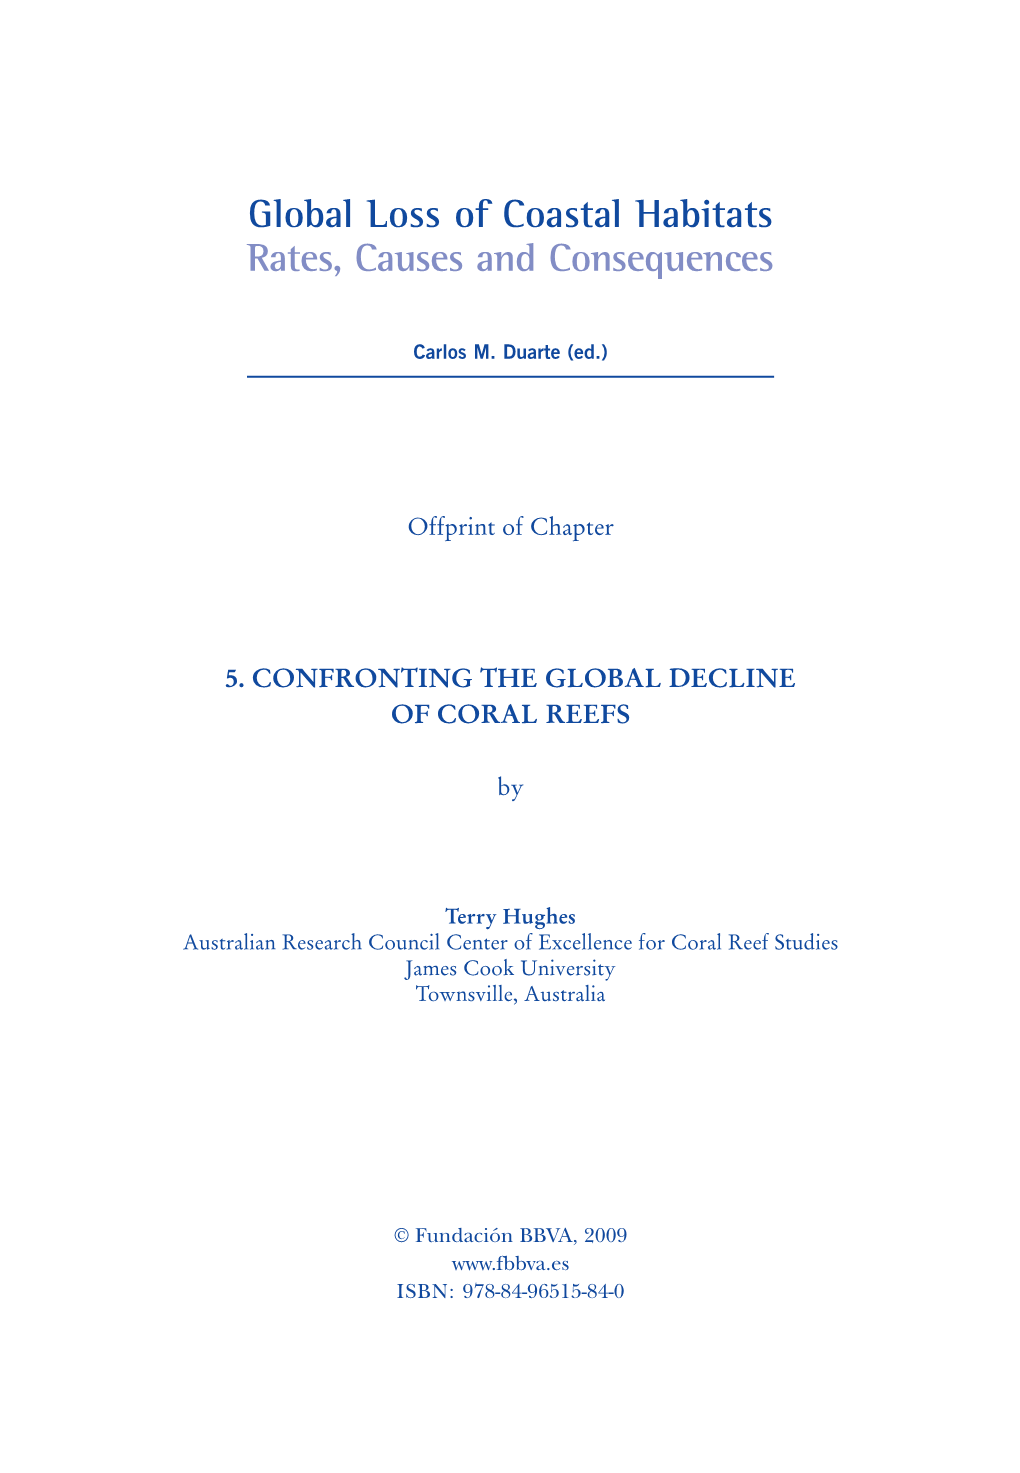 Confronting the Global Decline of Coral Reefs Global Loss of Coastal